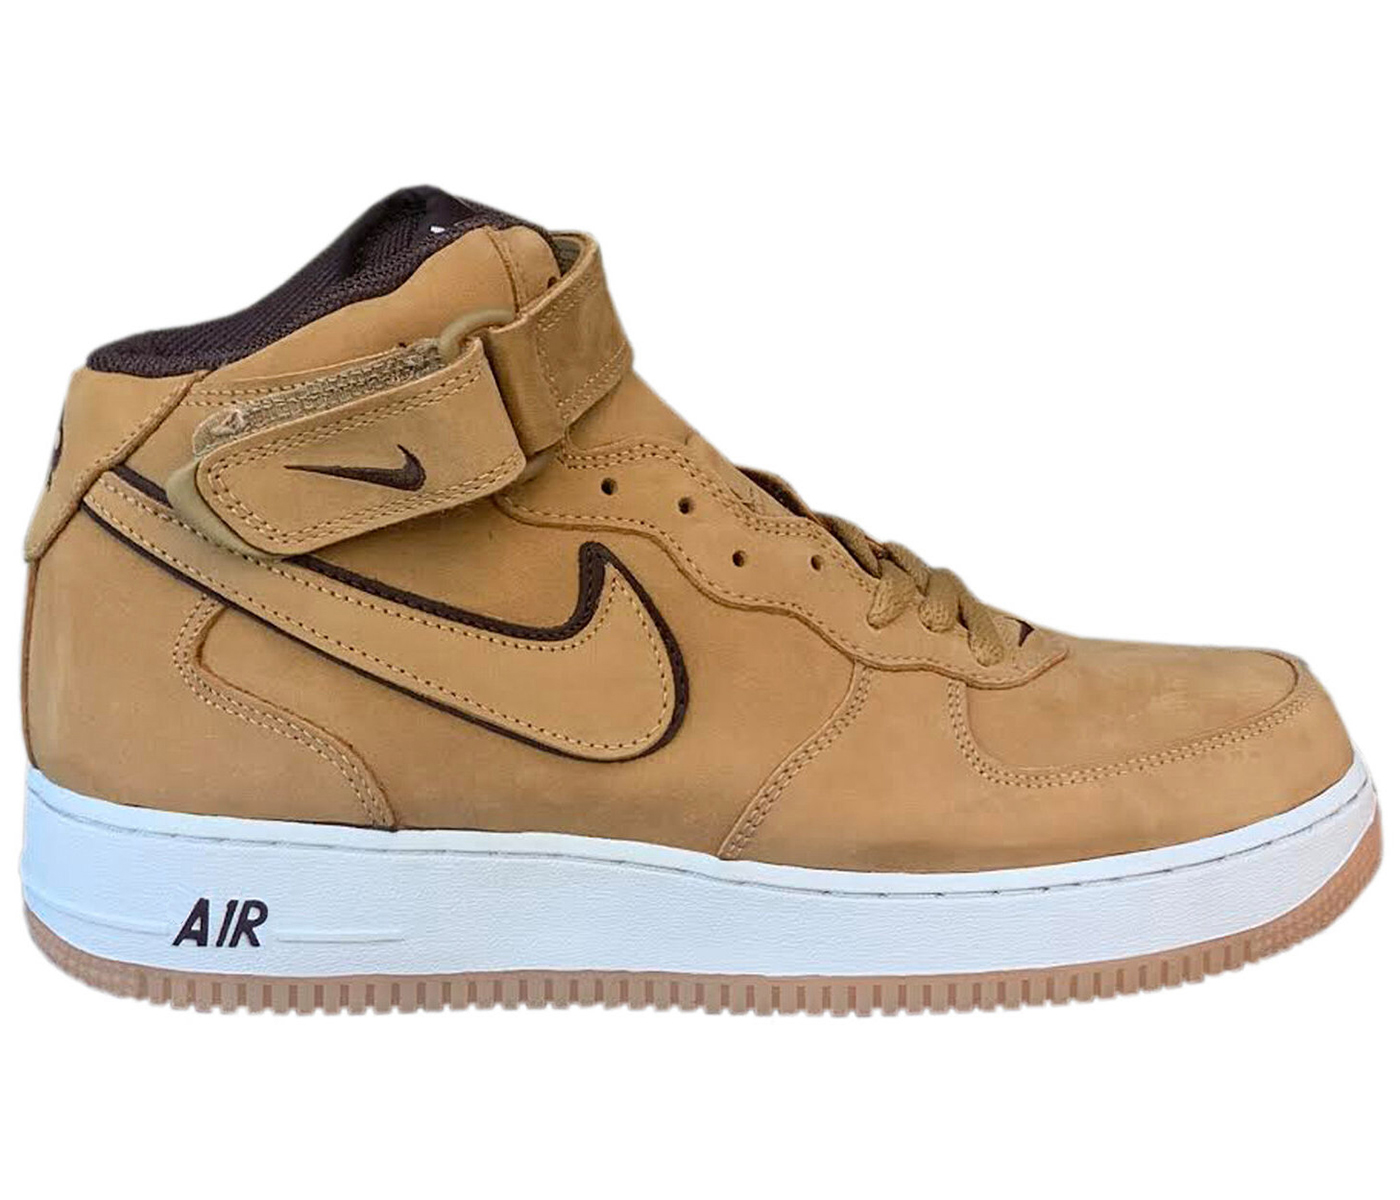 AIR FORCE 1 MID WP 28cm 307105-771